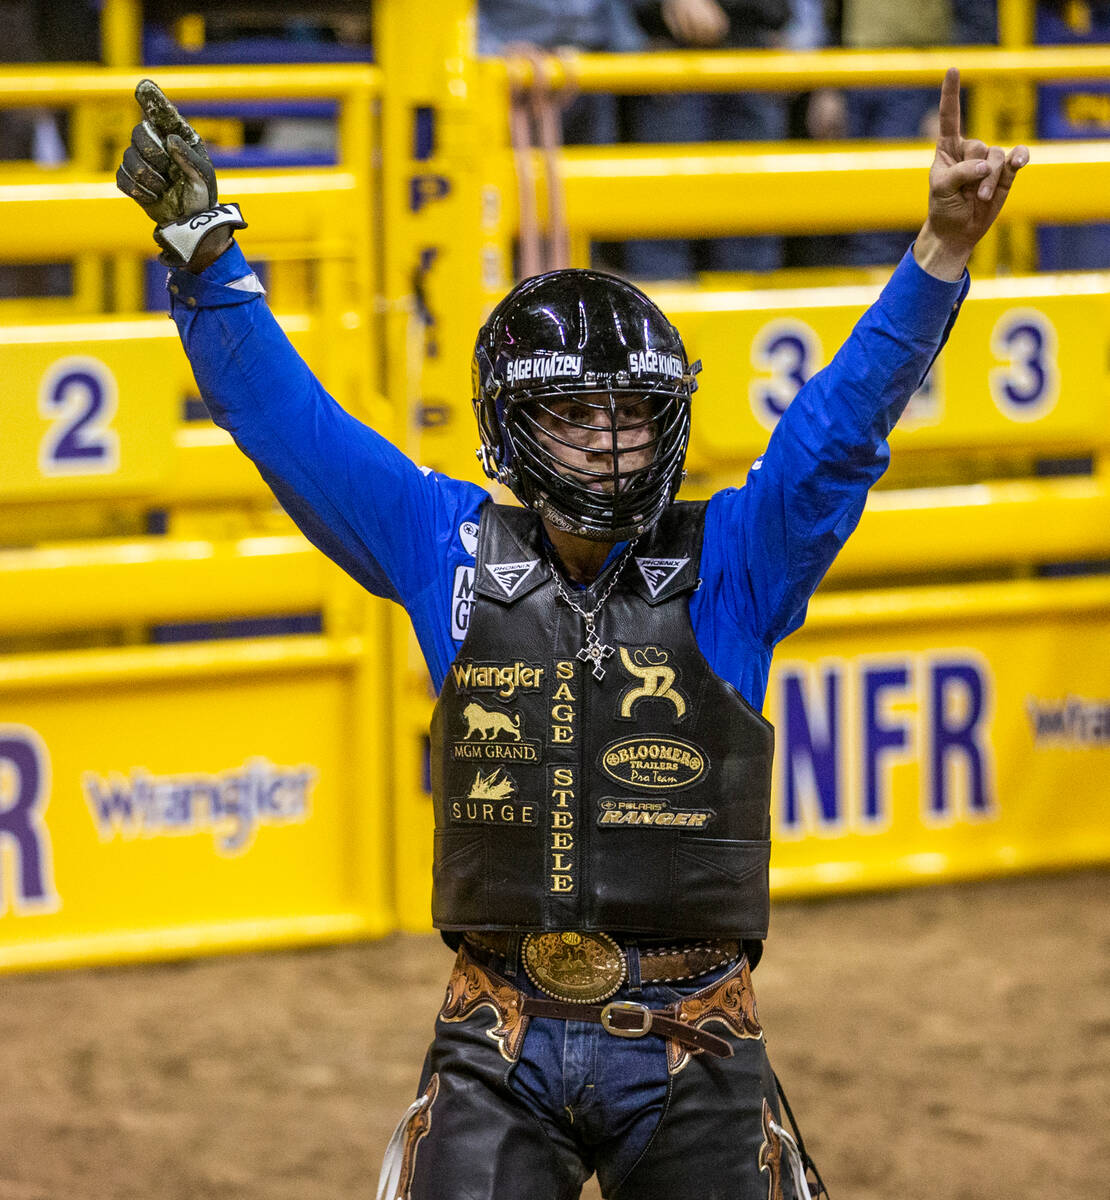 Sage Kimzey of Strong City, Okla., celebrates a great ride on Risky Business in Bull Riding dur ...